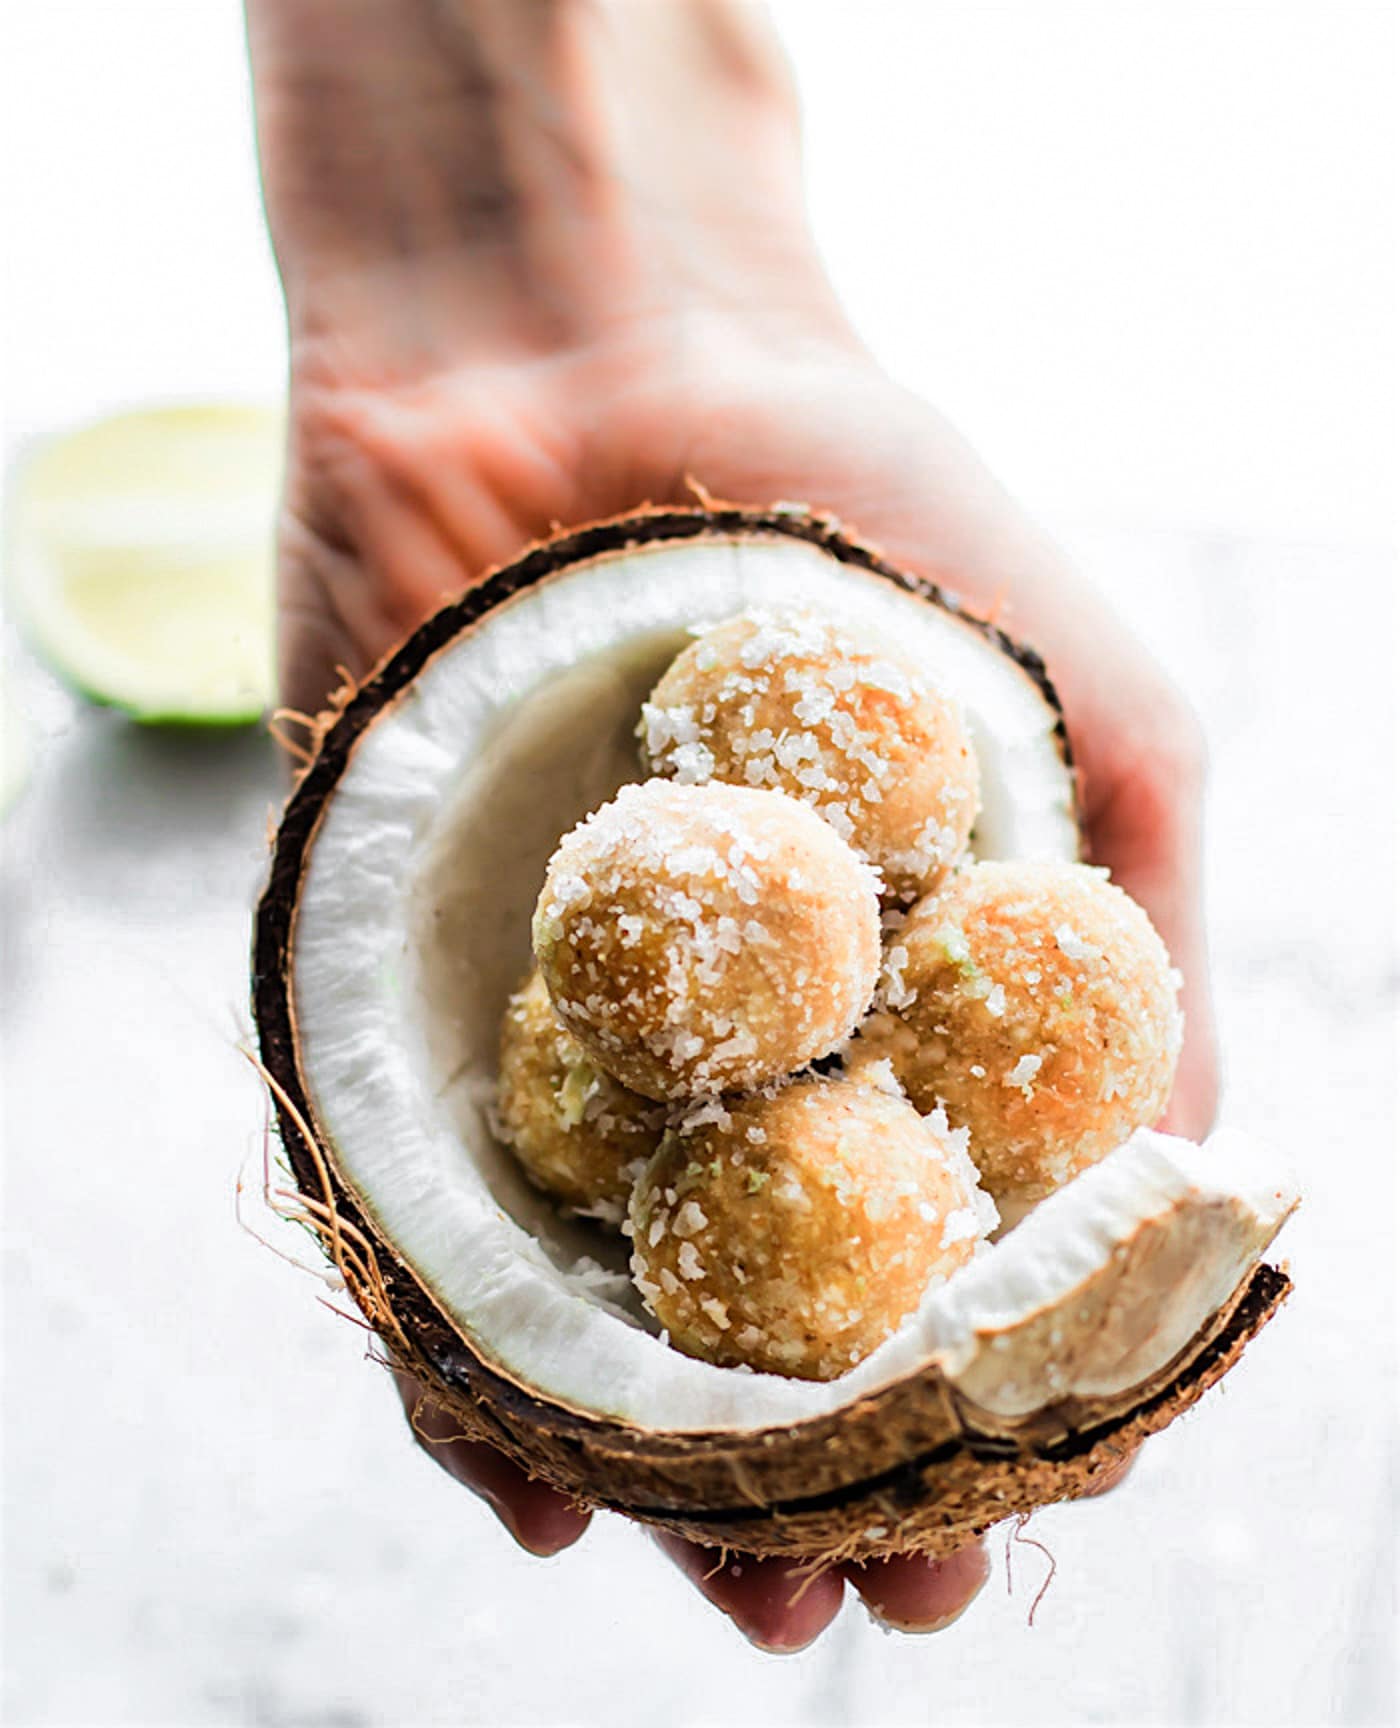 No Bake Coconut Margarita Bites! Super simple no bake coconut margarita treats in dessert bite form! These bites are naturally gluten free, paleo friendly, and vegan! Bites that actually taste like a frozen margarita with natural lime and coconut flavors.